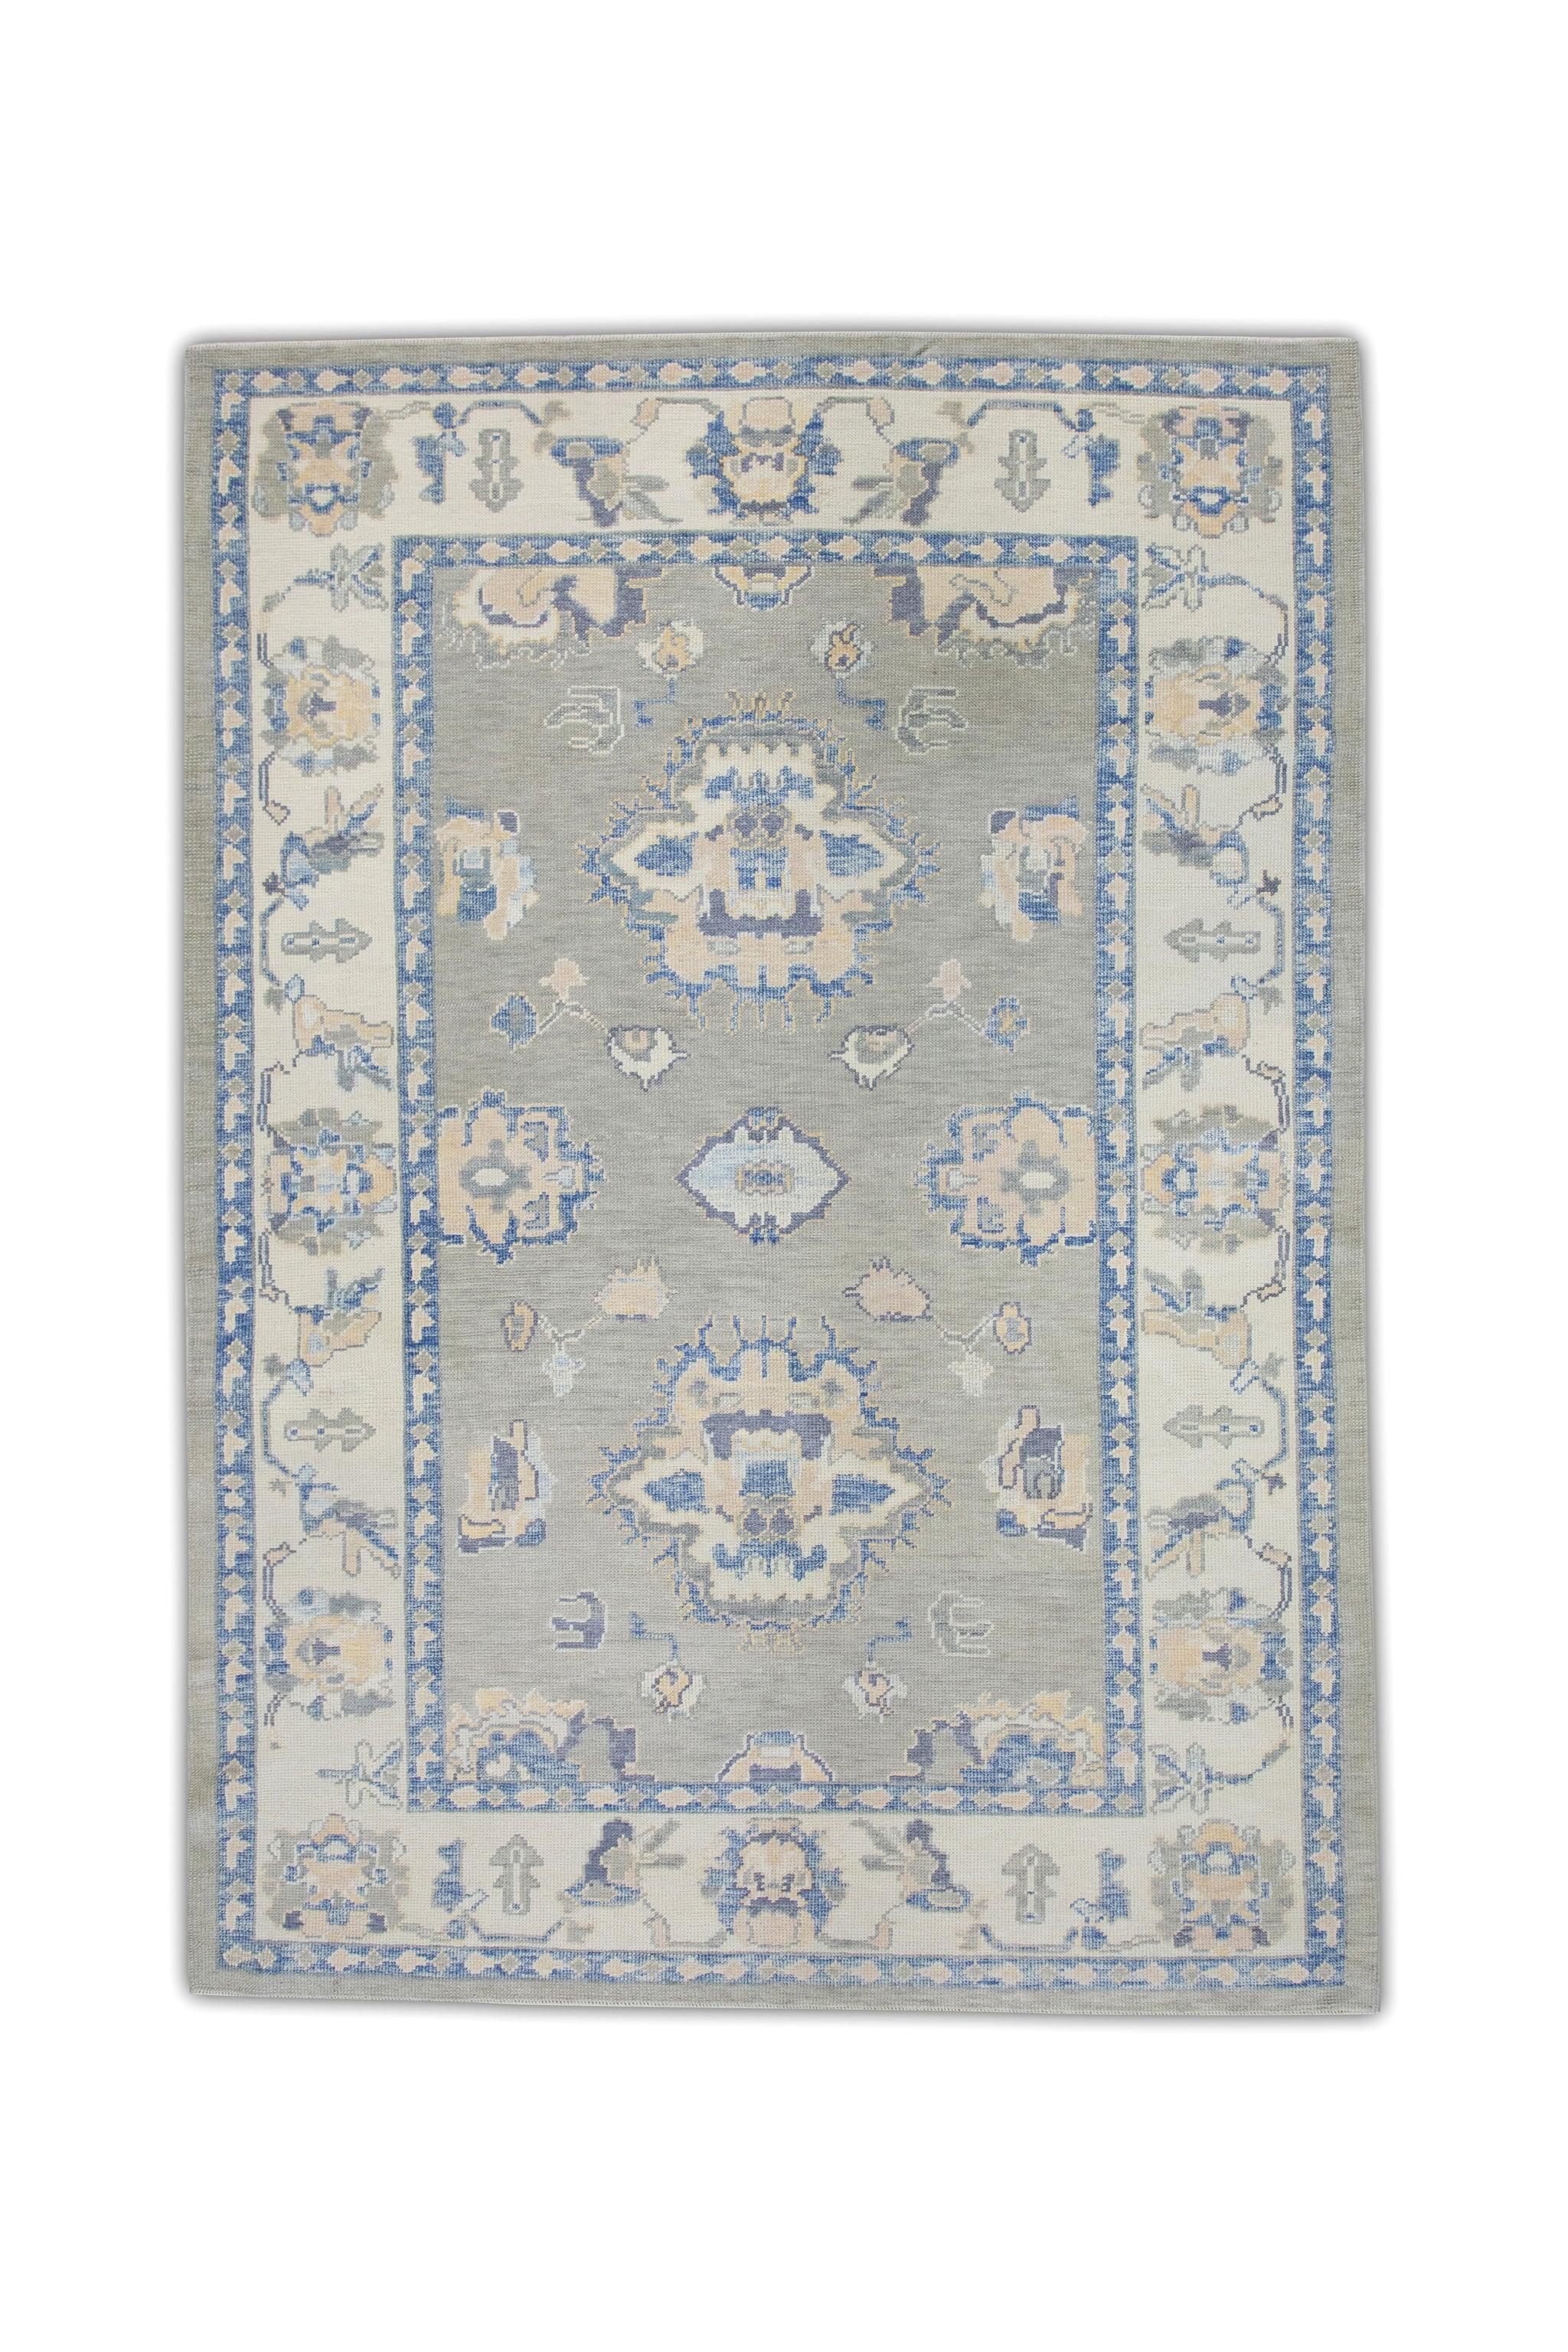 Green and Blue Floral Handwoven Wool Turkish Oushak Rug 6' x 8'4